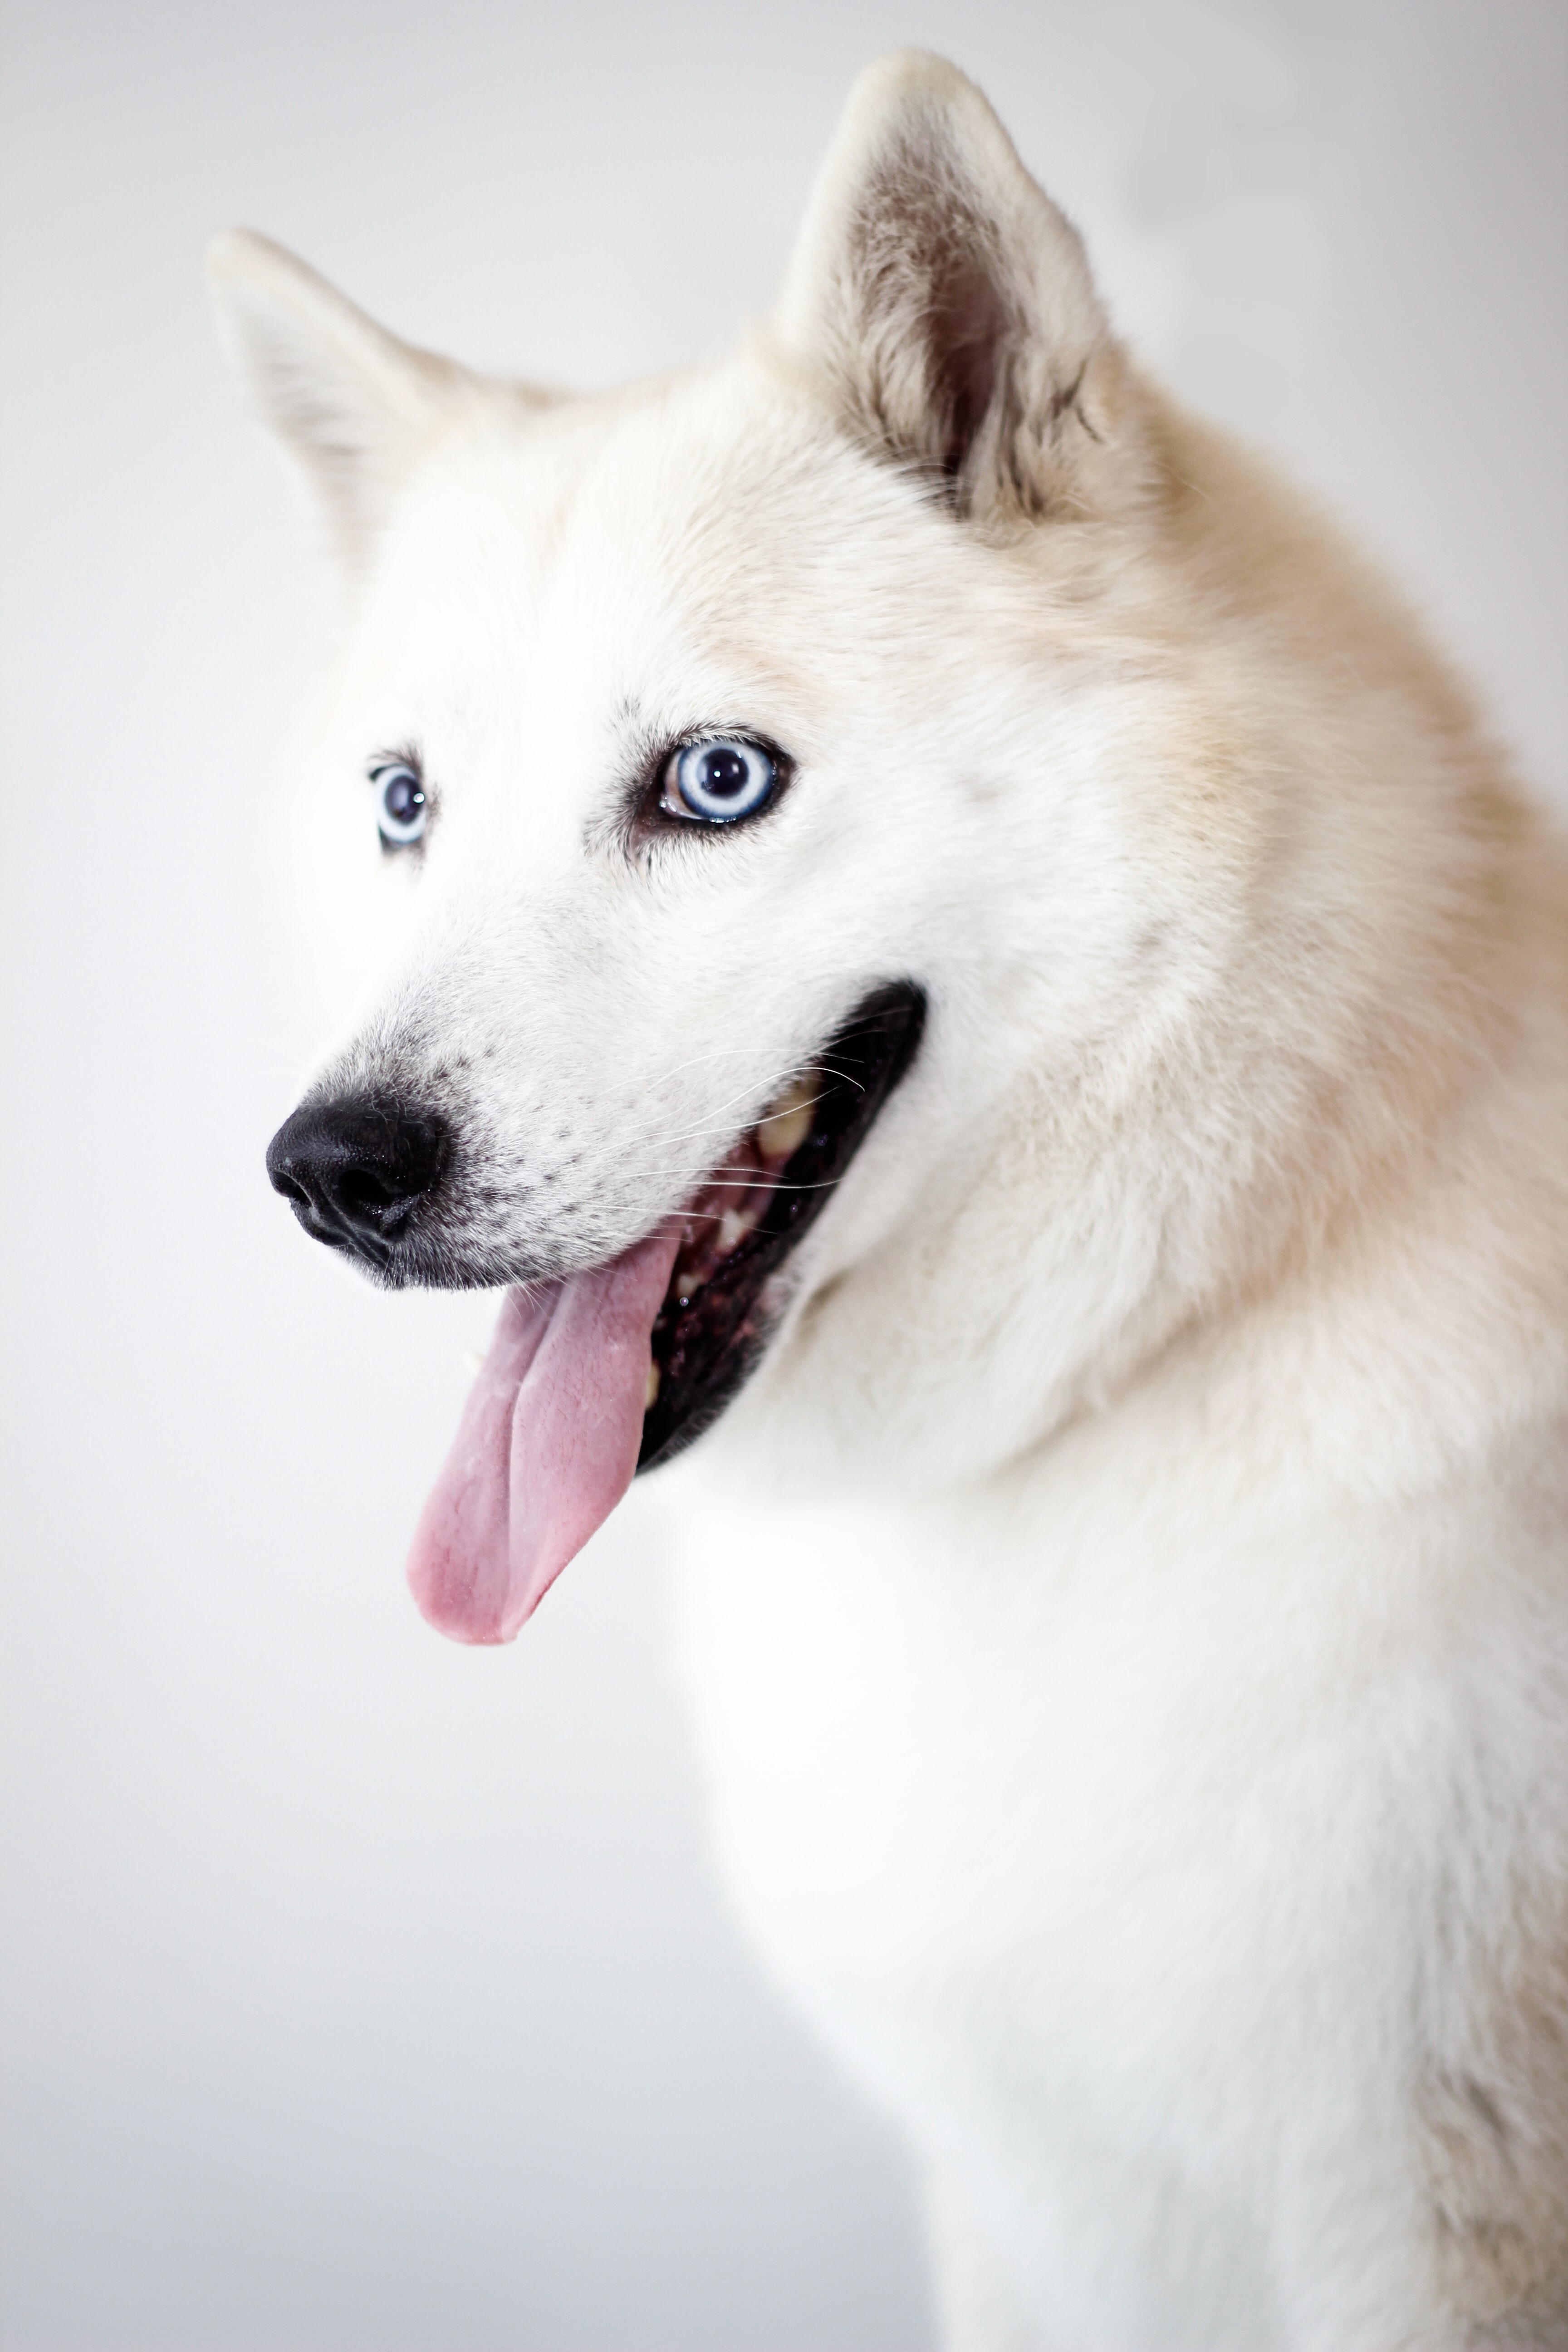 tongue stuck out, husky, animals, white, dog, protruding tongue Aesthetic wallpaper